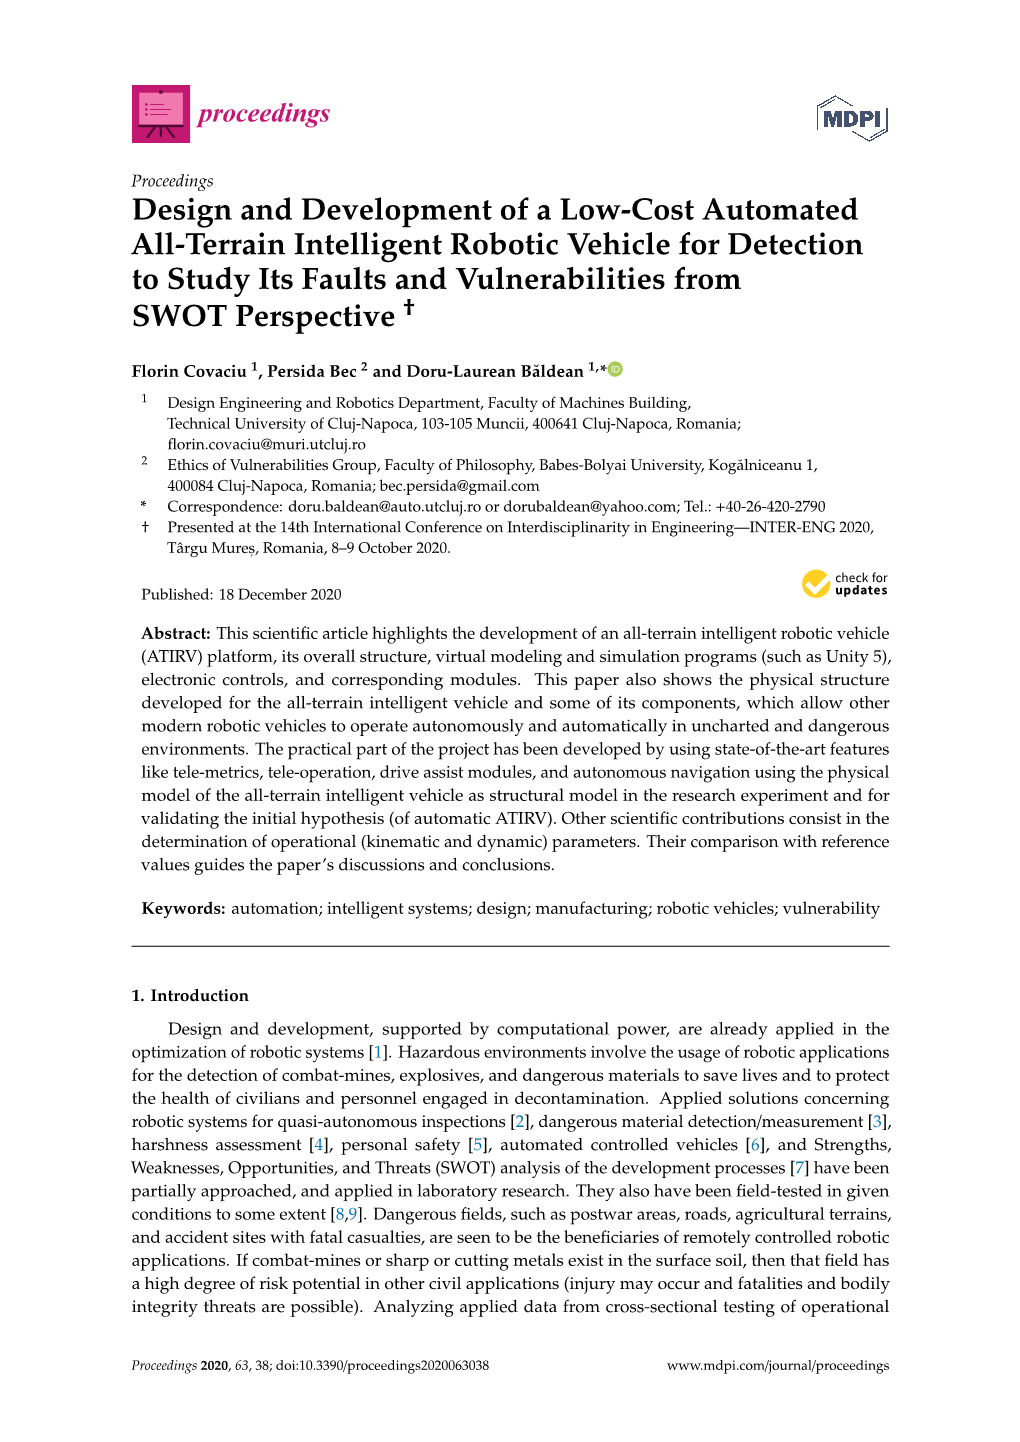 Design and Development of a Low-Cost Automated All-Terrain Intelligent Robotic Vehicle for Detection to Study Its Faults and Vulnerabilities from † SWOT Perspective